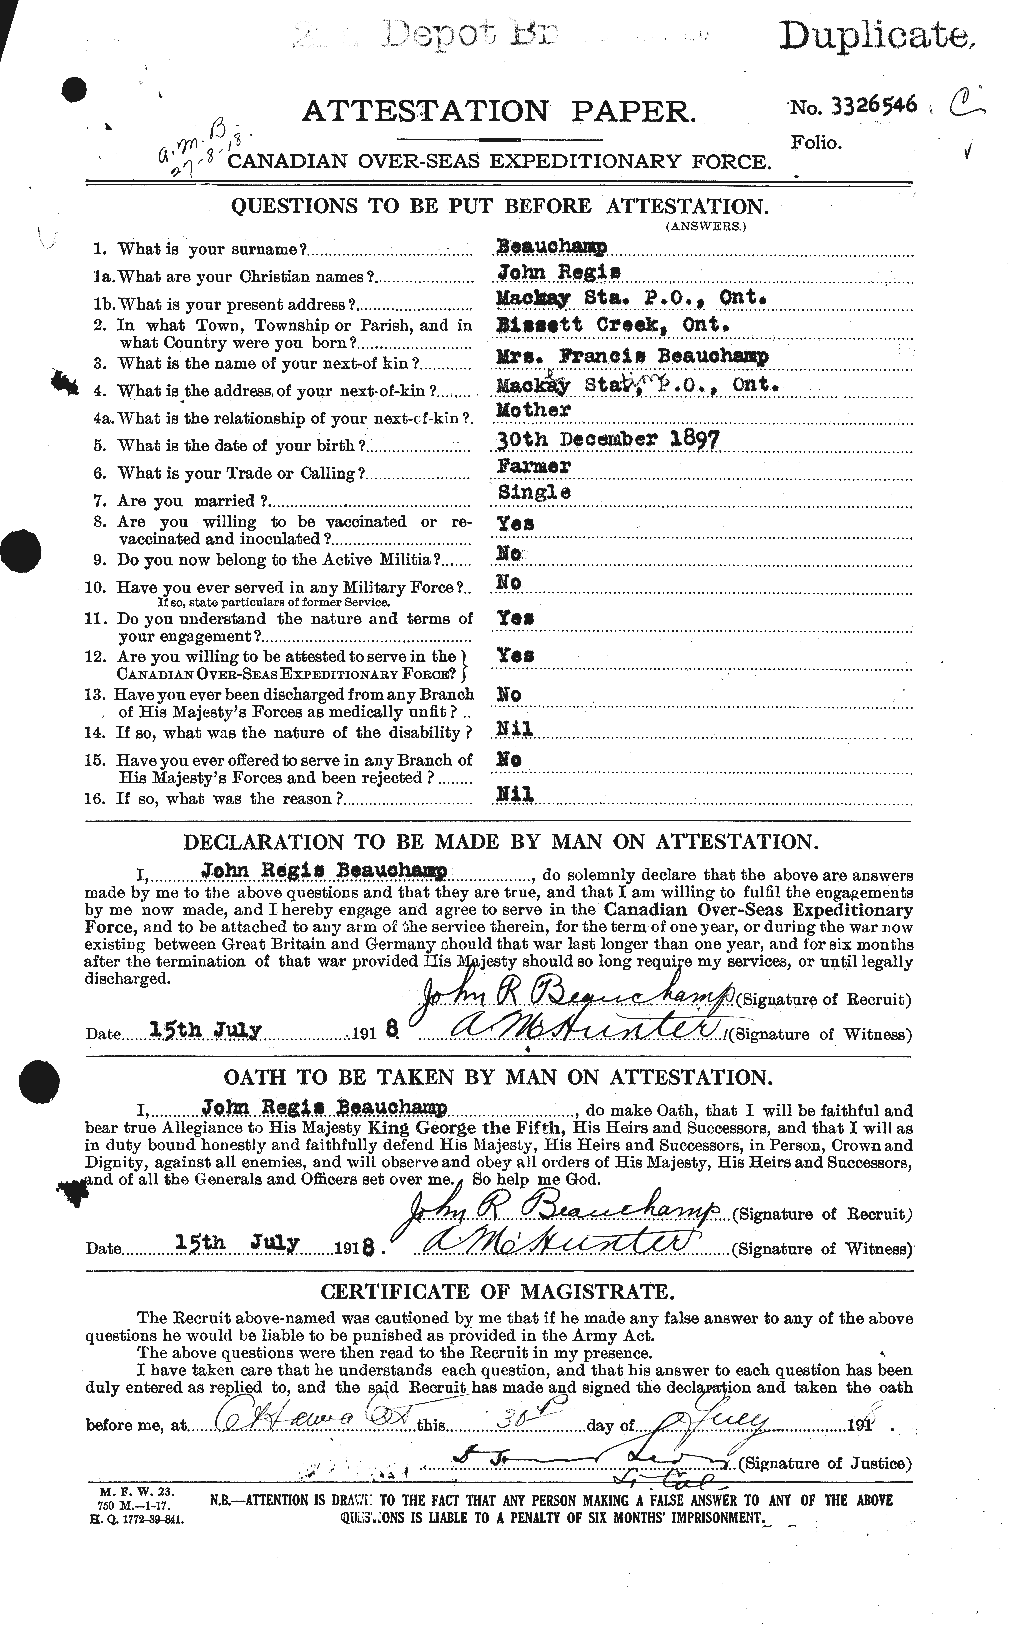 Personnel Records of the First World War - CEF 230986a